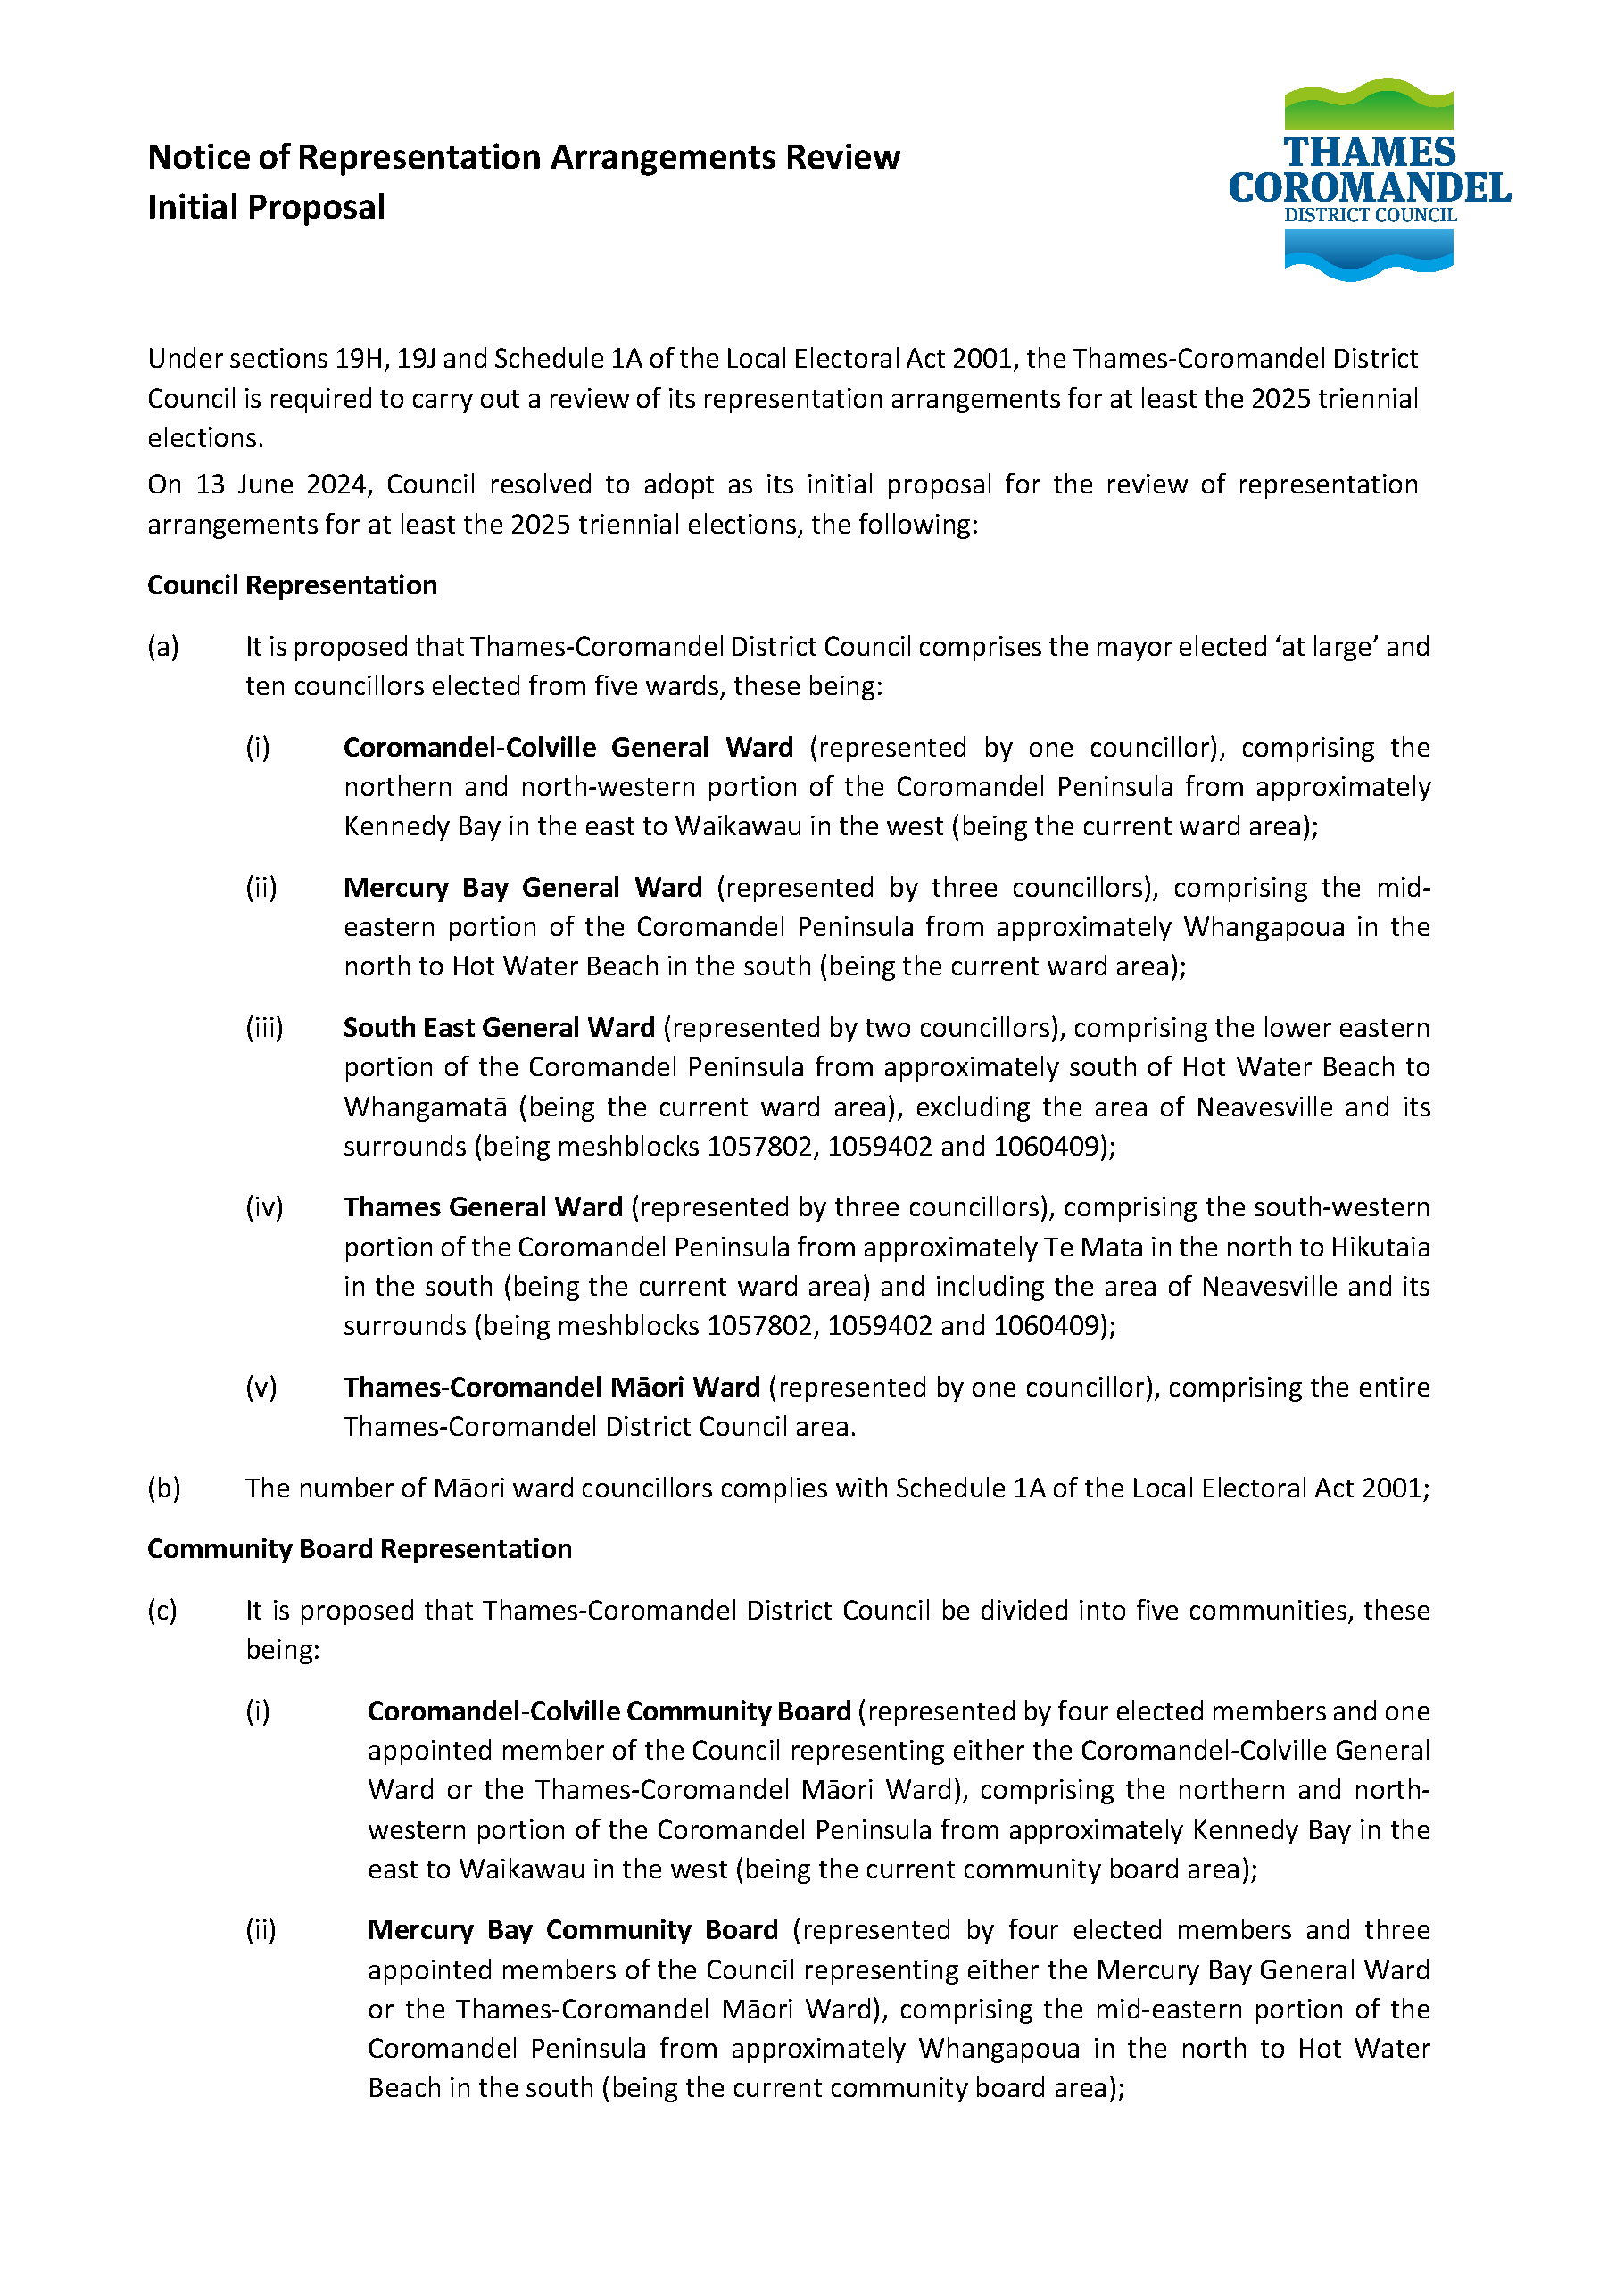 TCDC-Representation-InitialProposal-PublicNotice-210624-2_Page_1.png